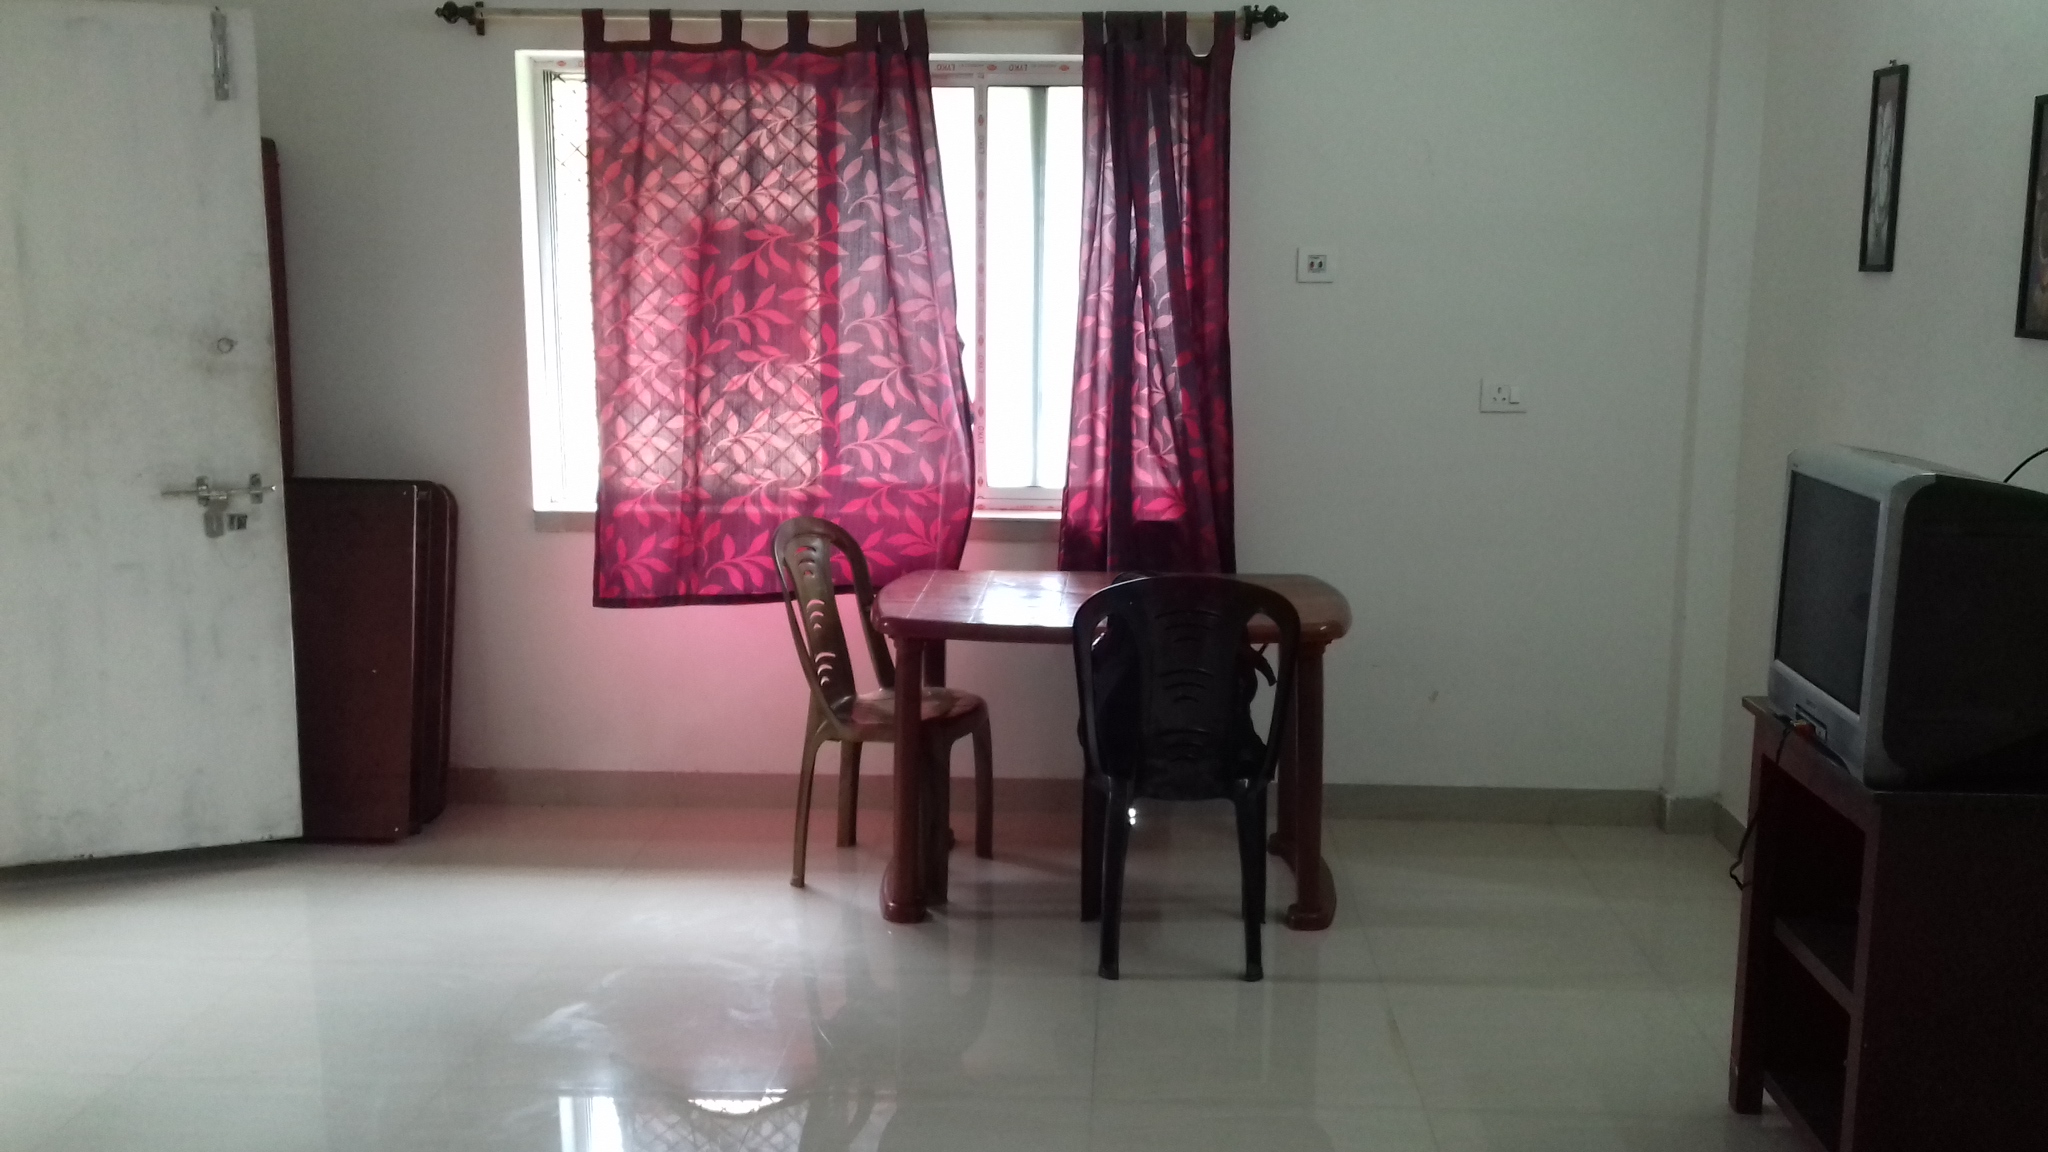 Office For Rent in Garia Station Road Kolkata (Id: 11620)